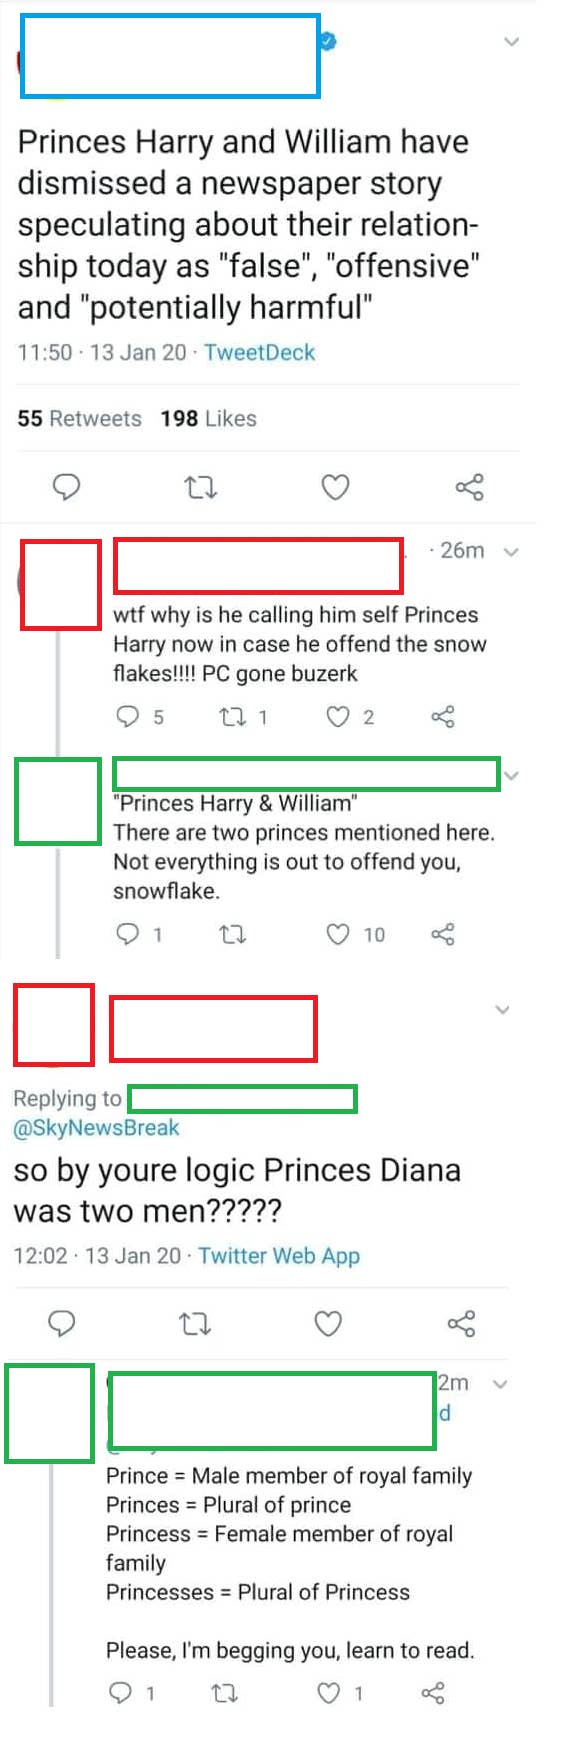 someone teaching the difference between Princes and Princess